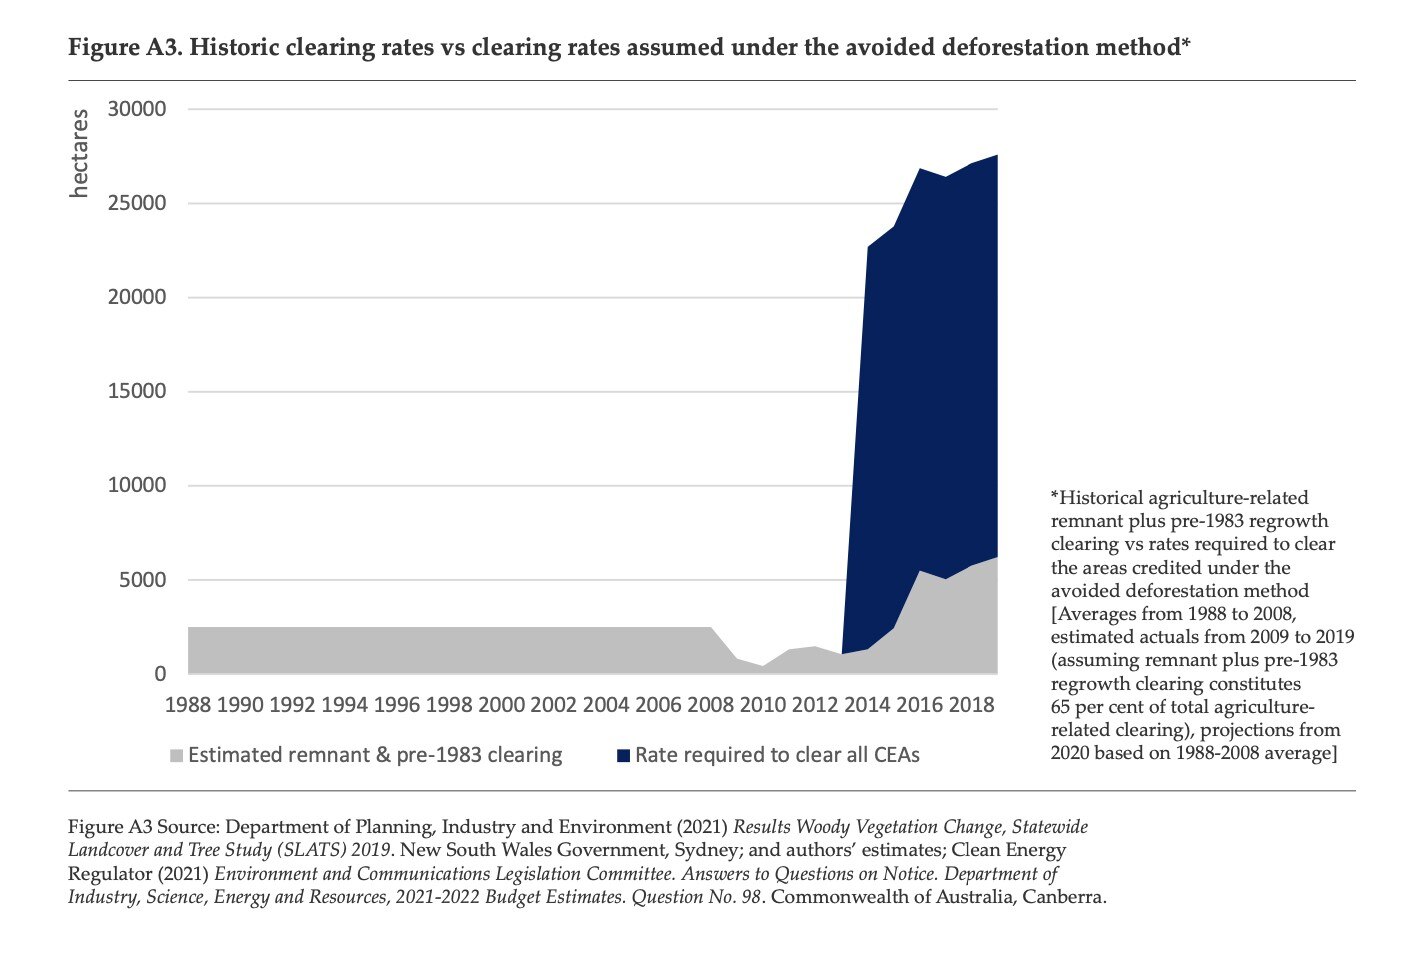 A graph showing clearing rates of about 2,500 hectares per year. Avoided deforestation sees a dramatic jump to about 27,500h.